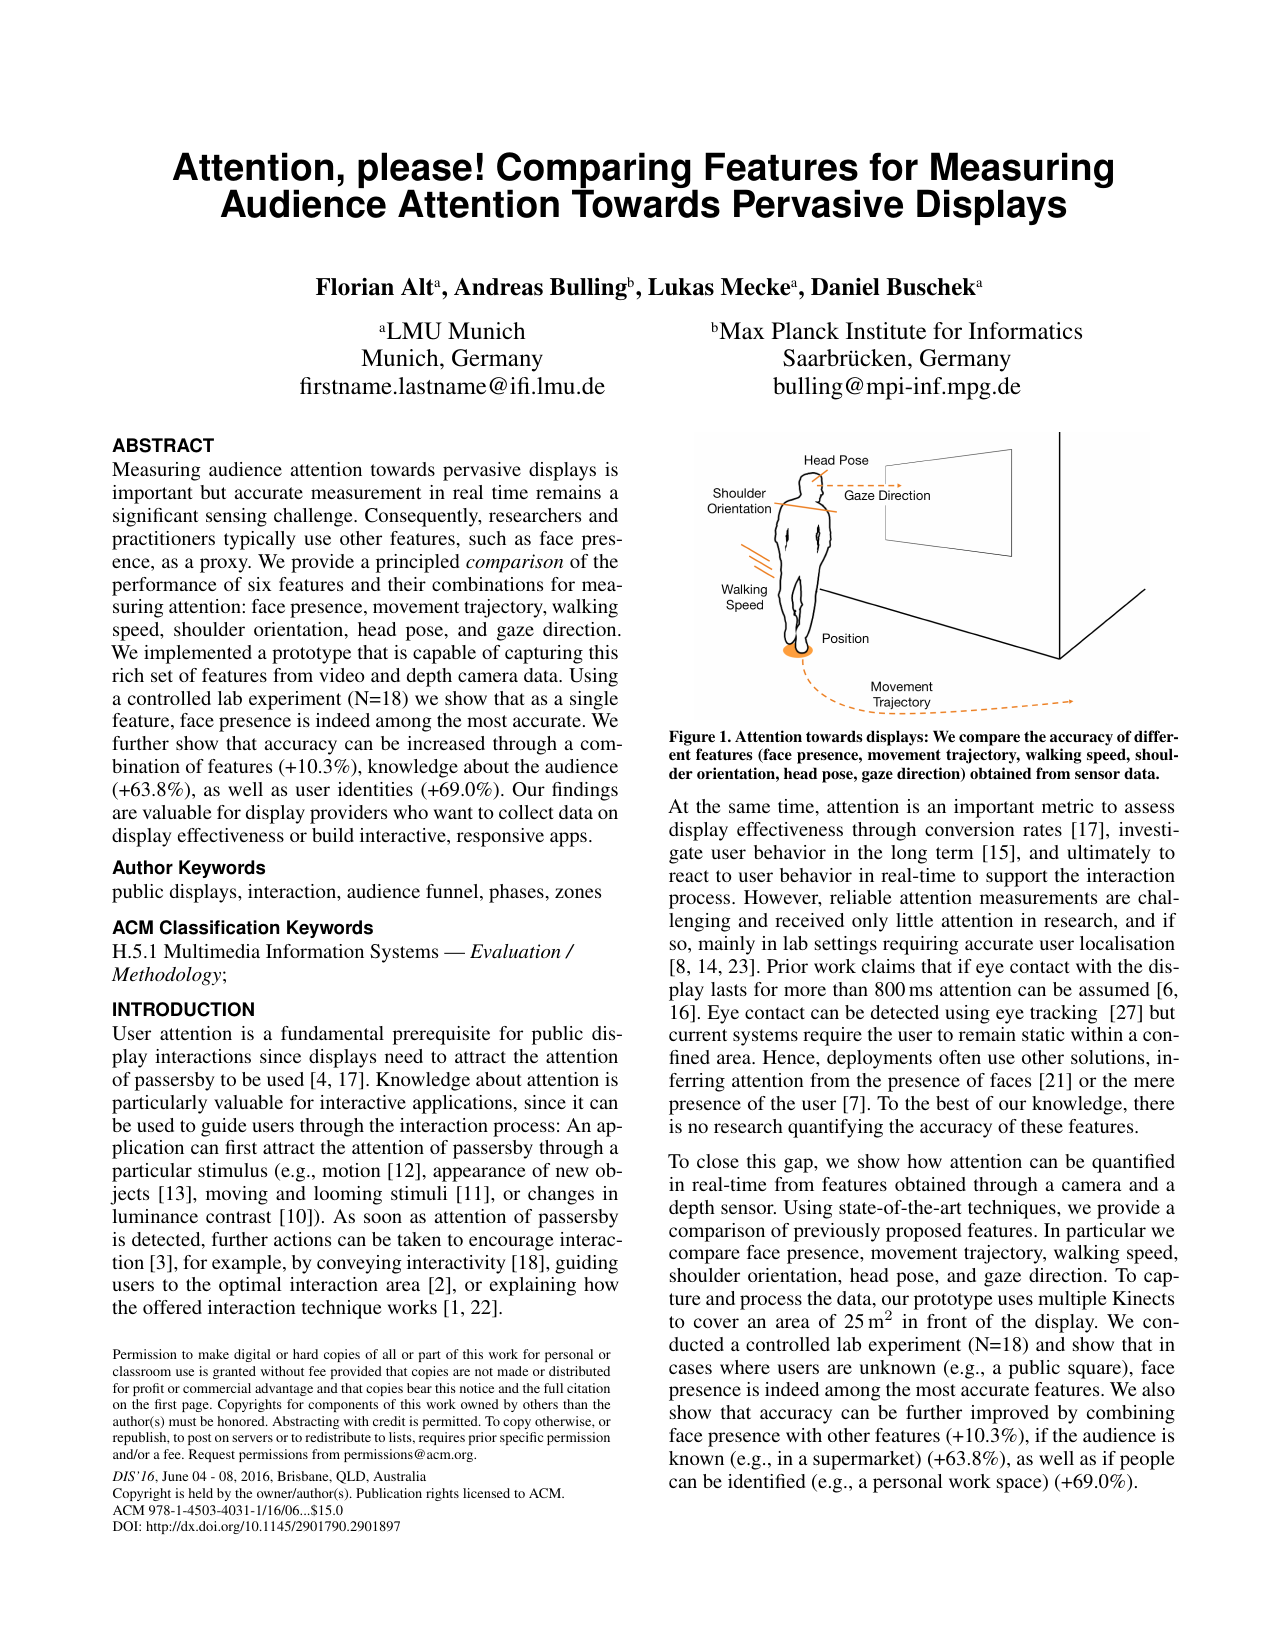 Attention, please! Comparing Features for Measuring Audience Attention Towards Pervasive Displays